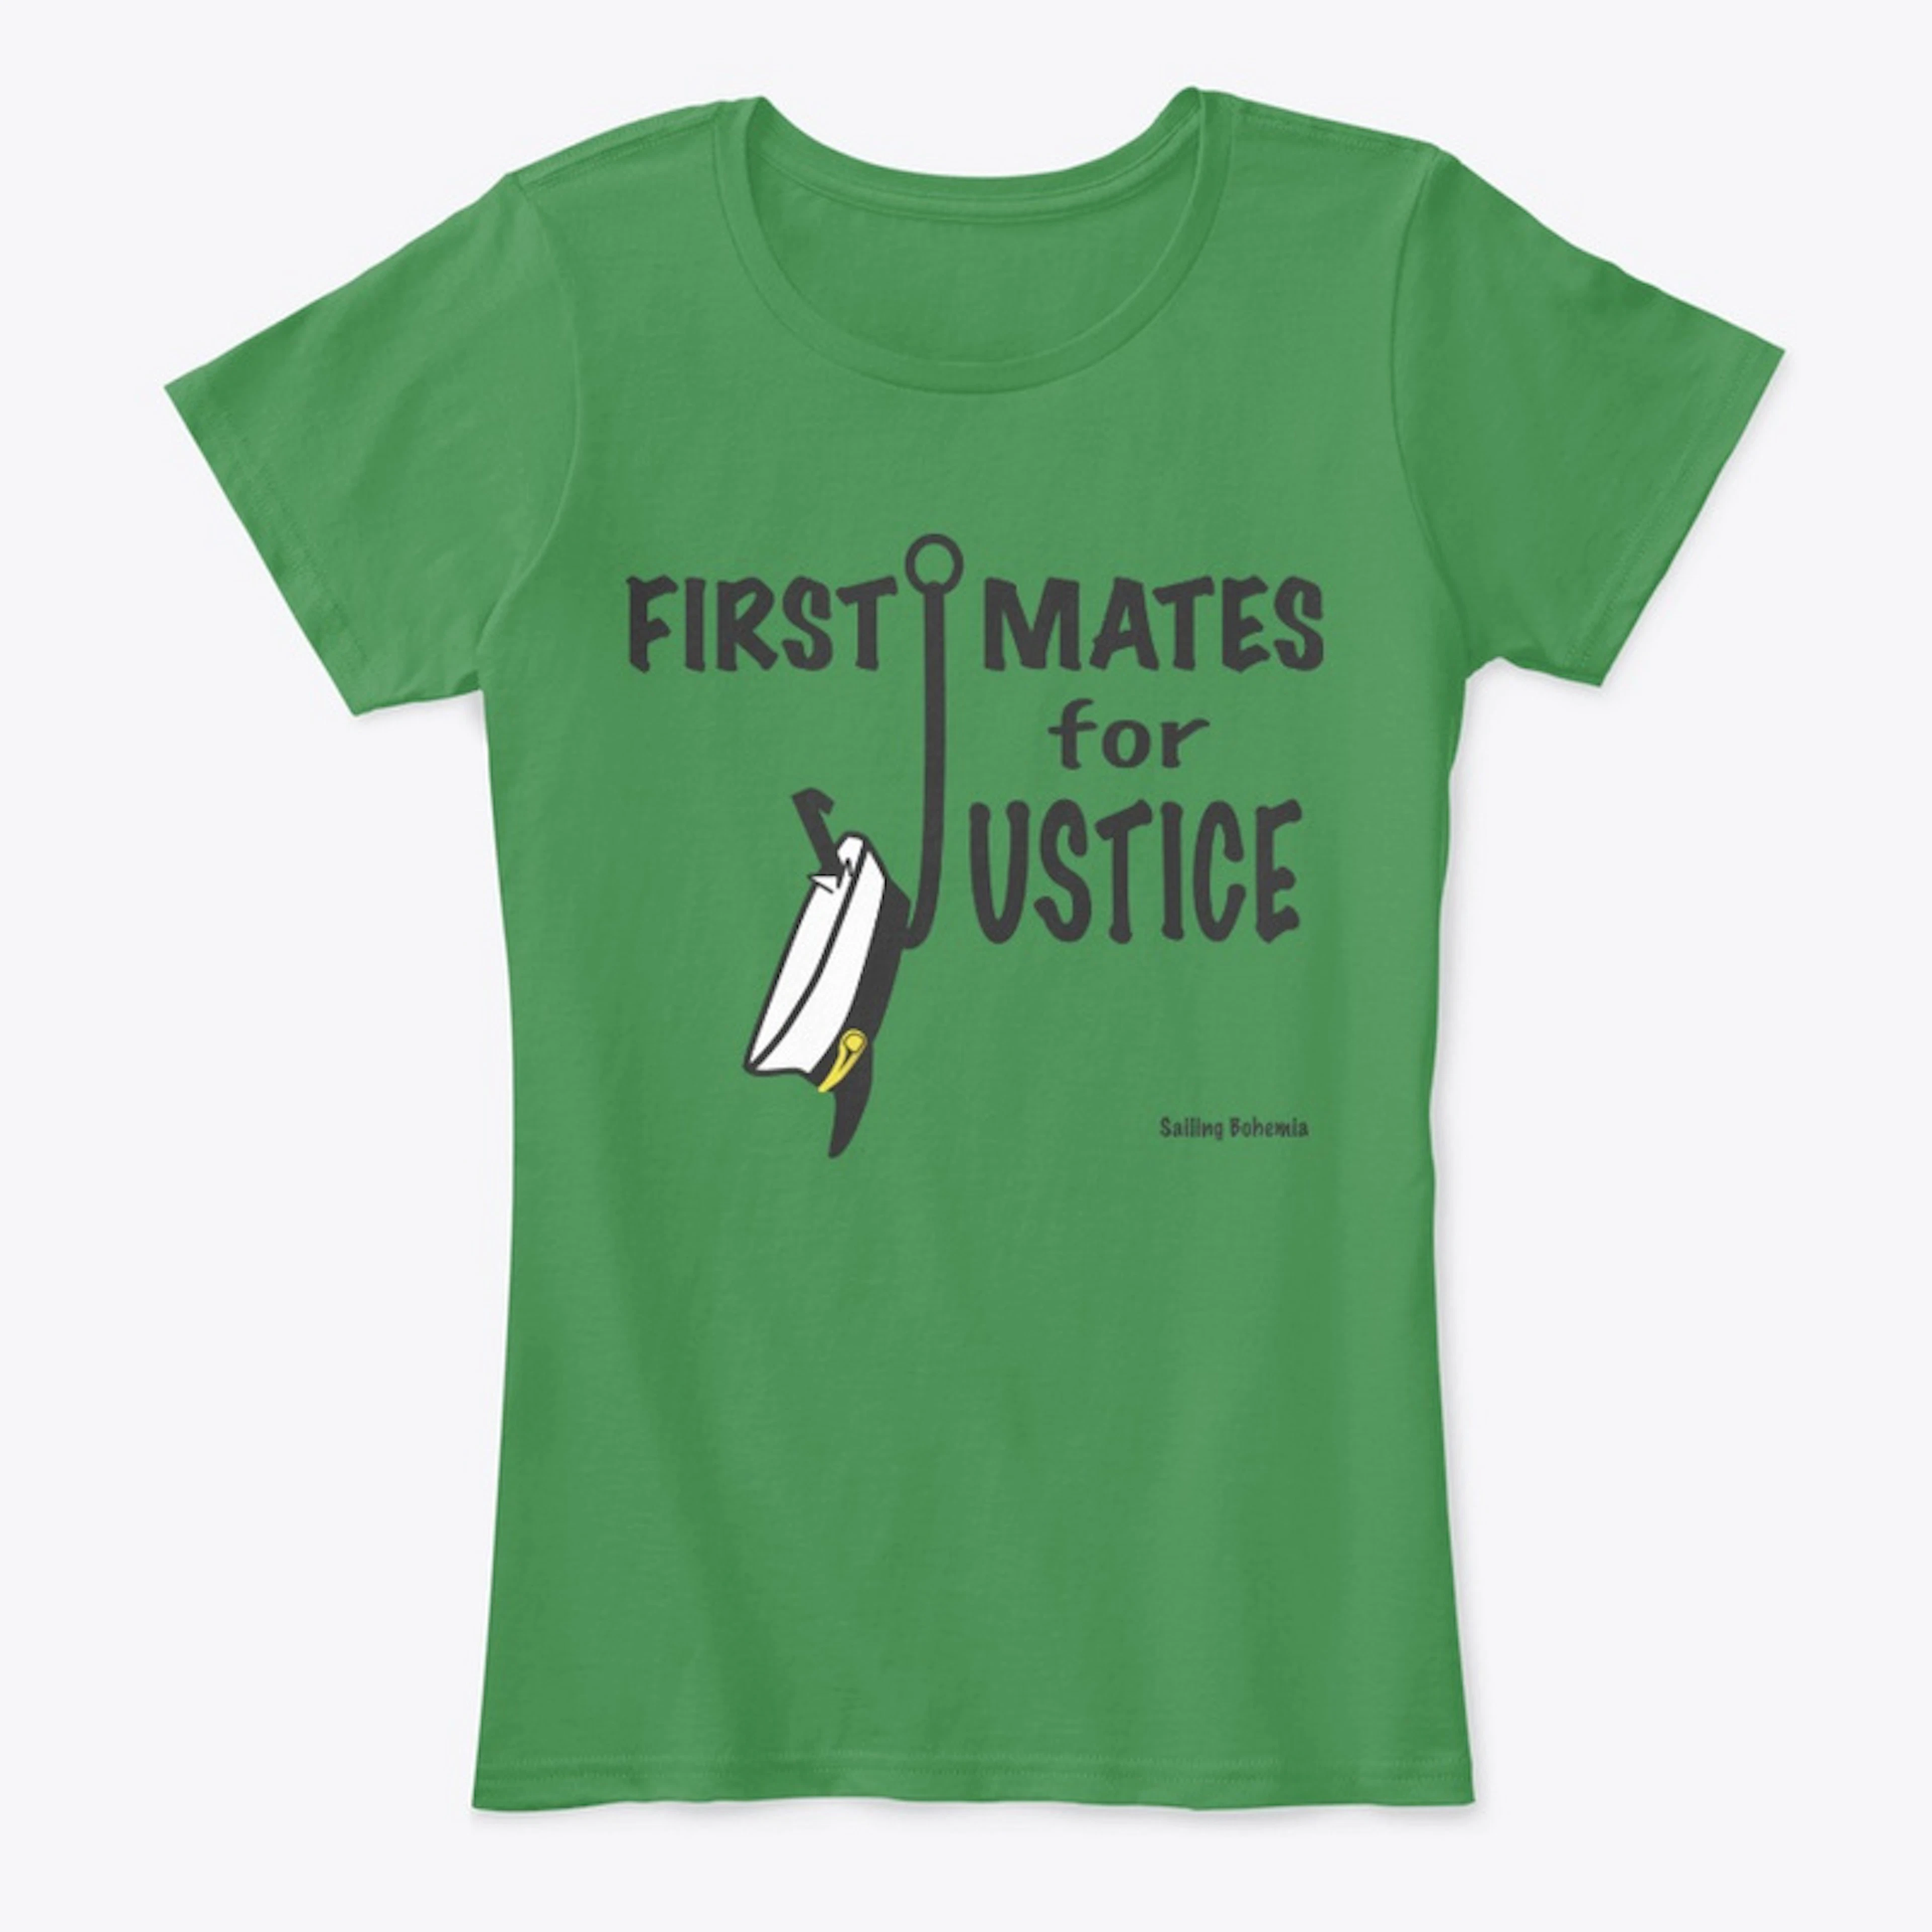 First Mates for Justice!